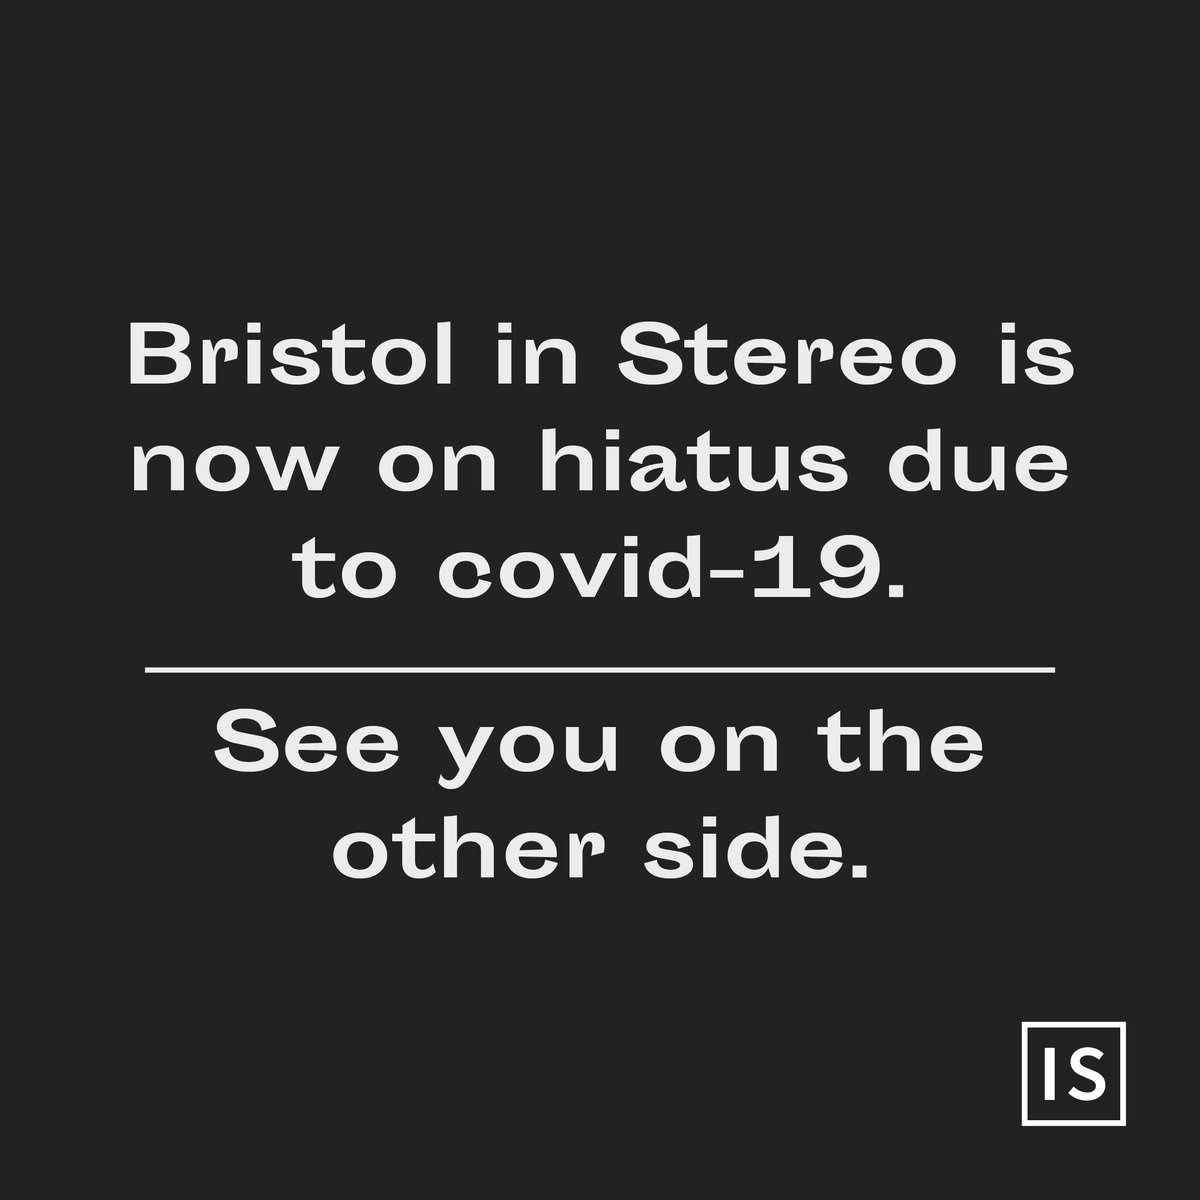 After pushing forward during the pandemic in whatever way we could, we’ve made the heavy decision to call a full (but hopefully brief) hiatus on Bristol, London and Berlin in Stereo.
We’ll see you on the other side, ready to celebrate music and concerts once again.